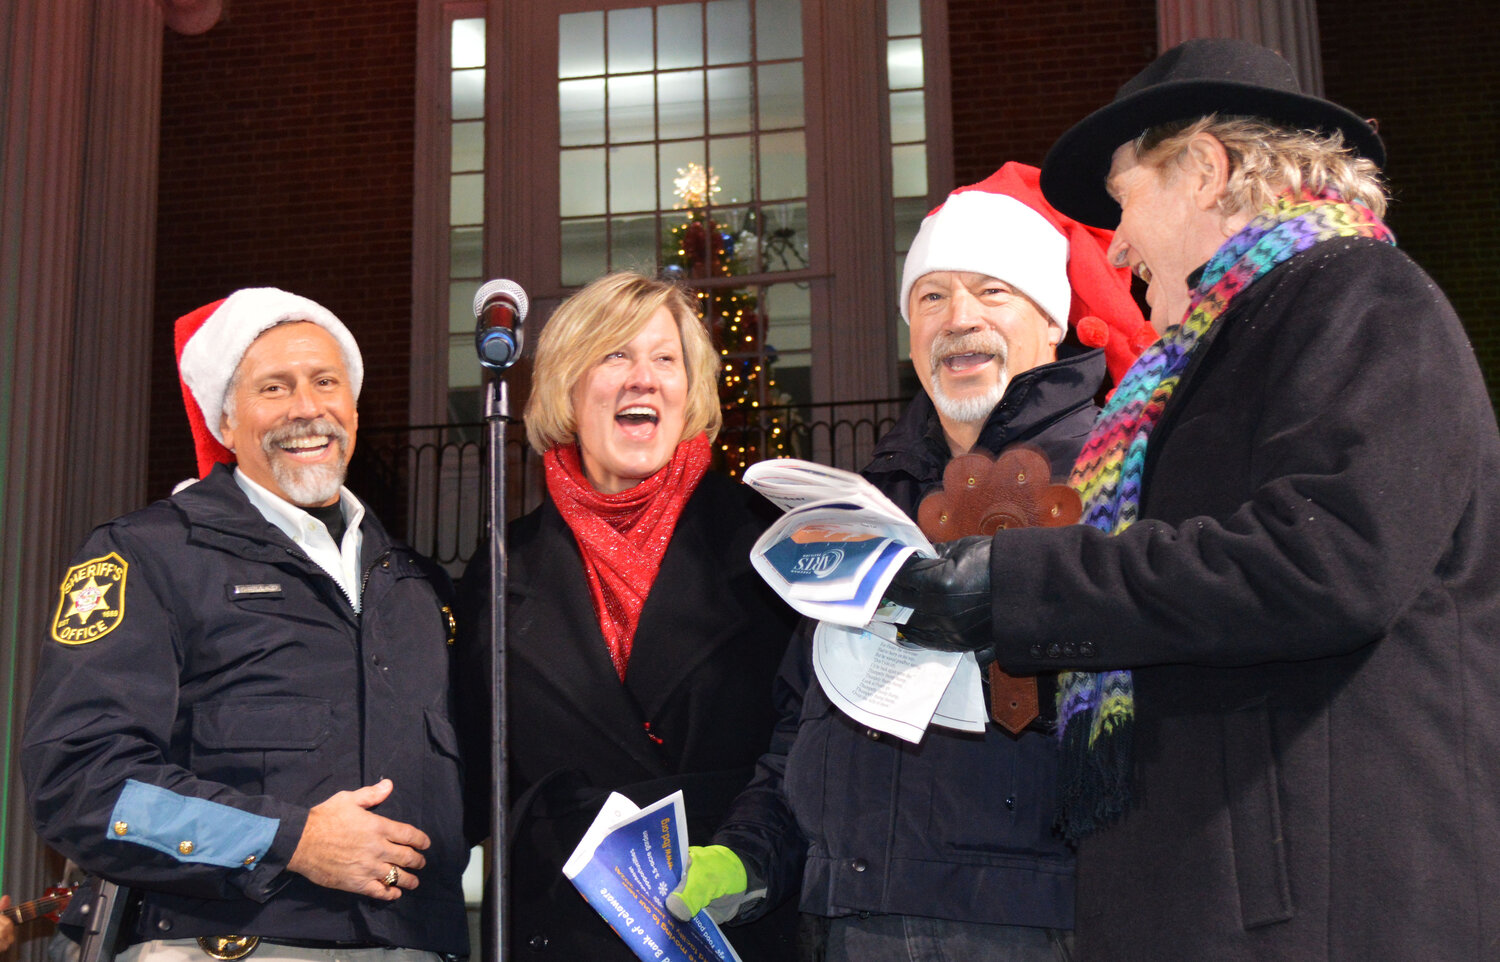 In a festive mood, from left, Sussex County Deputy Sheriff Steve Smyk, Lori Lee, Sheriff Robert Lee and Ed Shockly team up on a holiday favorite during Caroling on The Circle on Thursday.